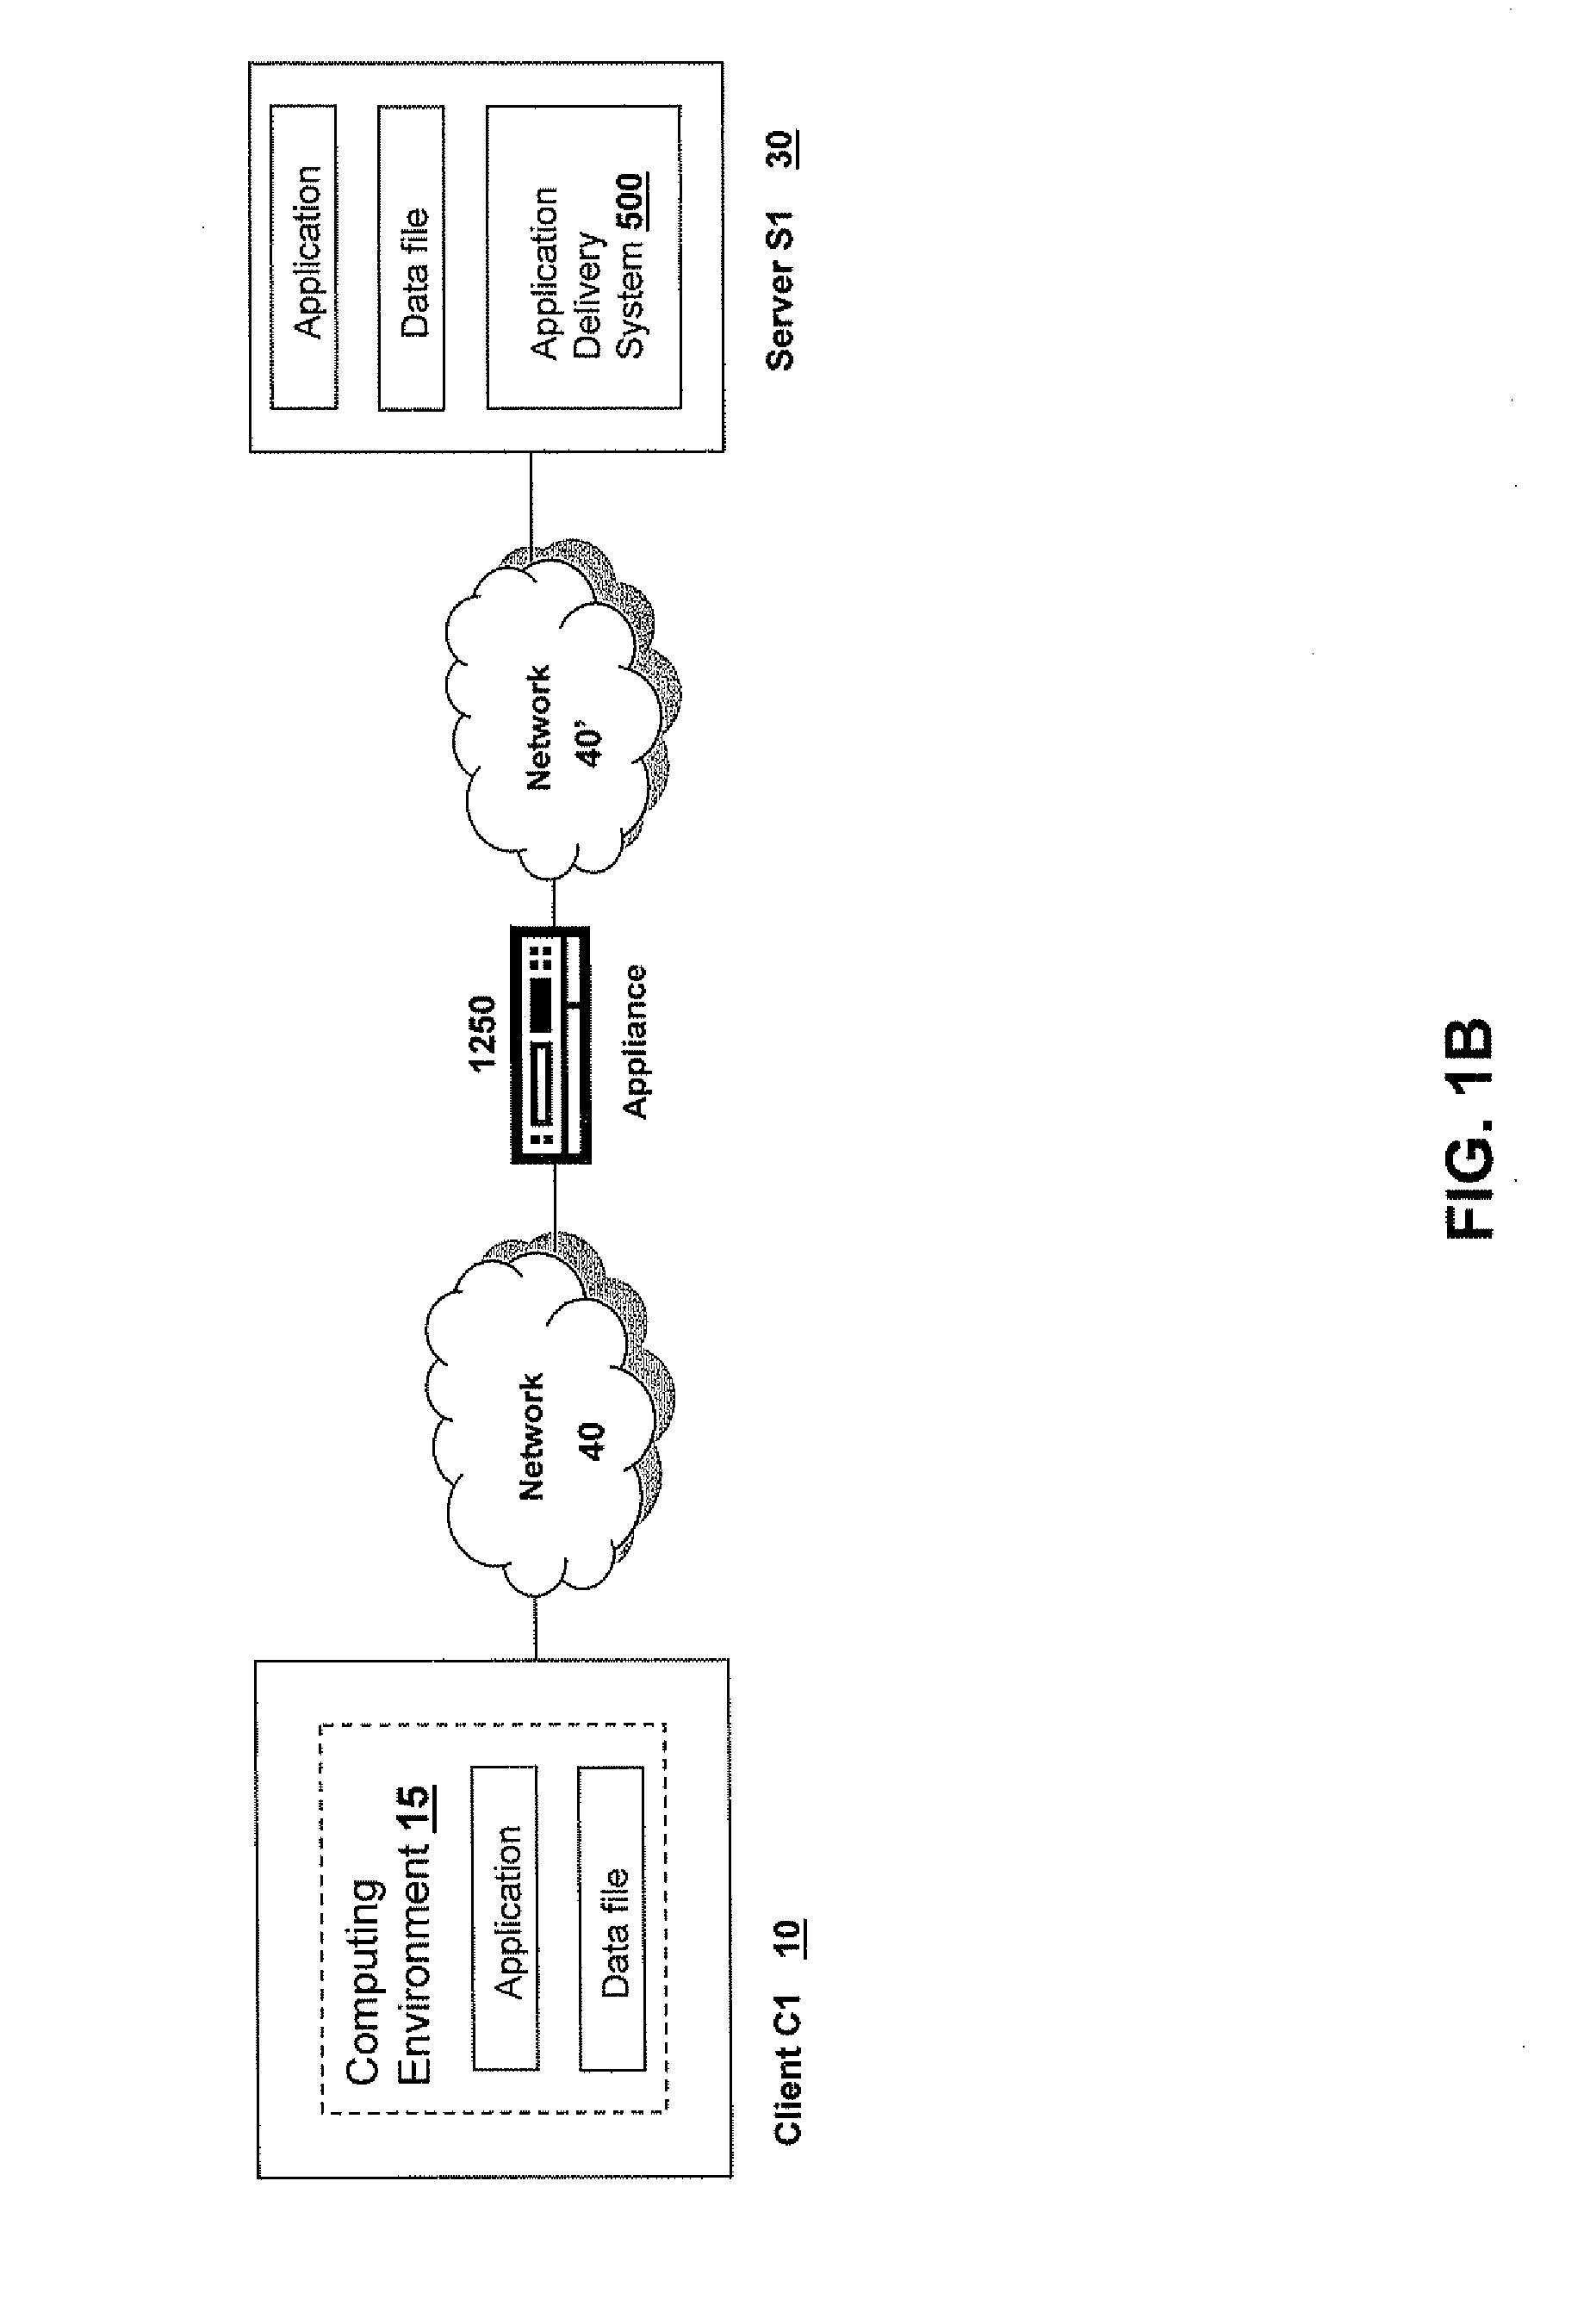 Systems and Methods for Providing Levels of Access and Action Control Via an SSL VPN Appliance